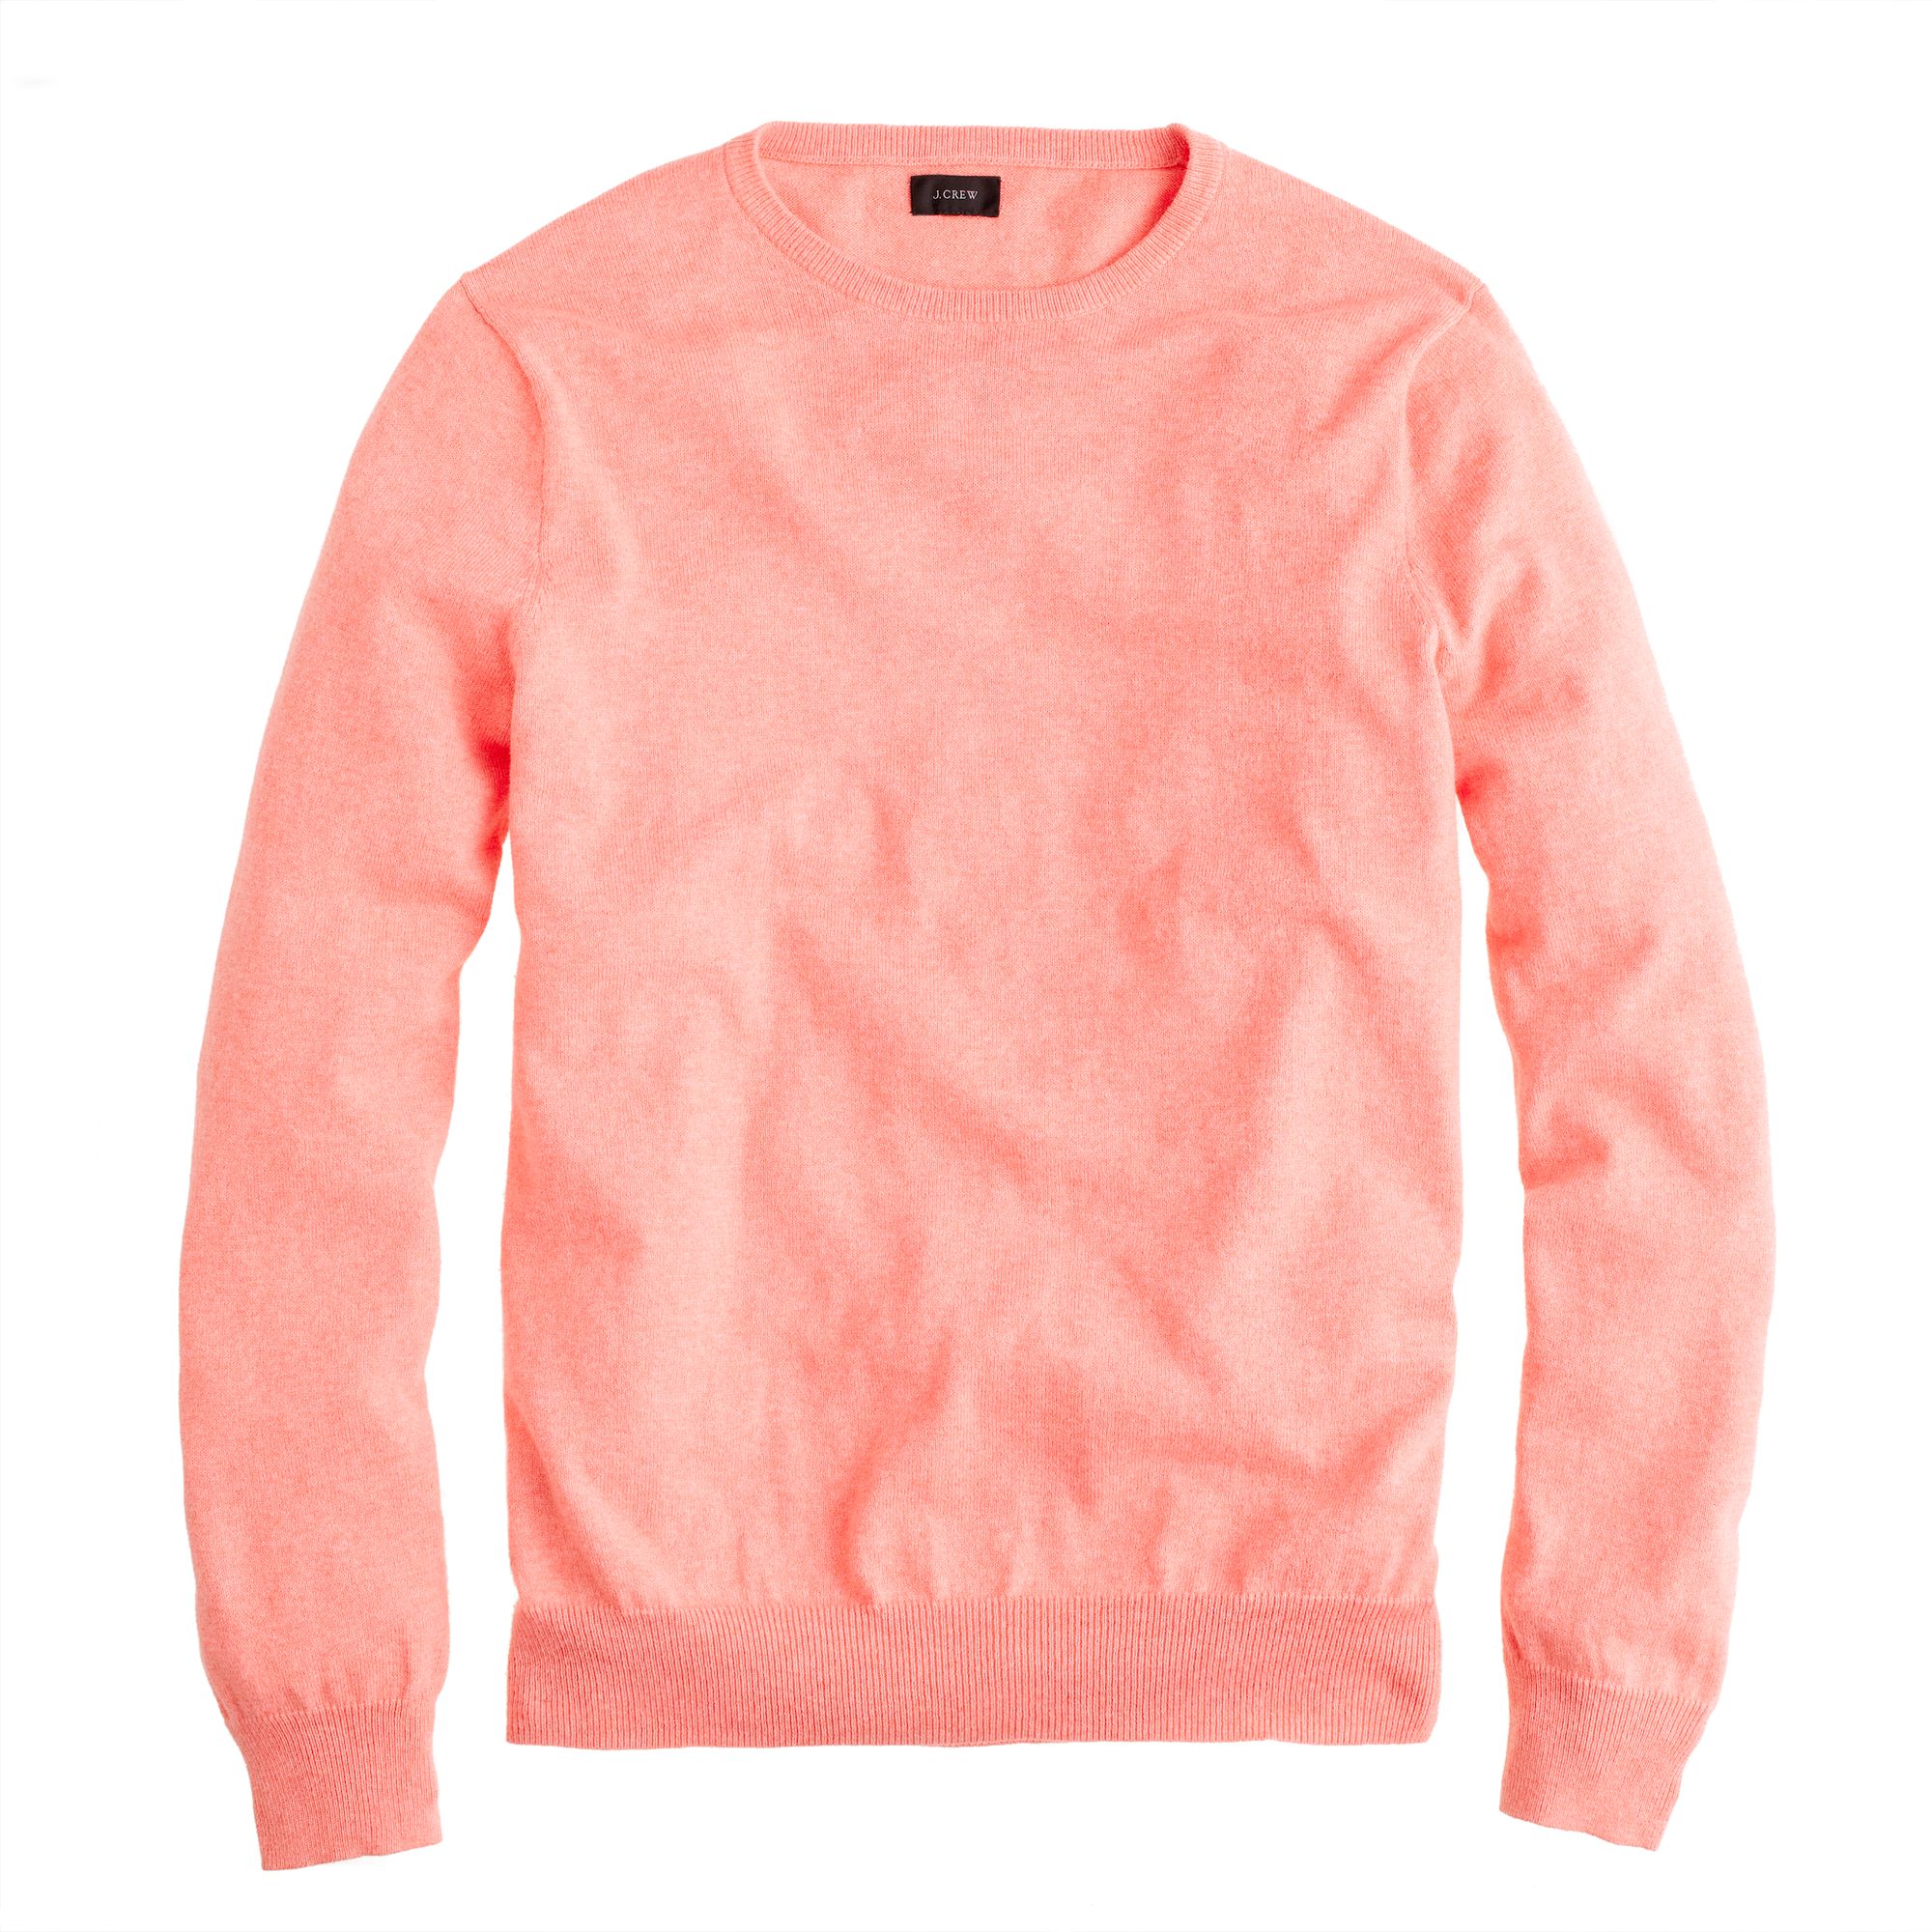 Lyst - J.Crew Cotton Cashmere Crewneck Sweater in Pink for Men